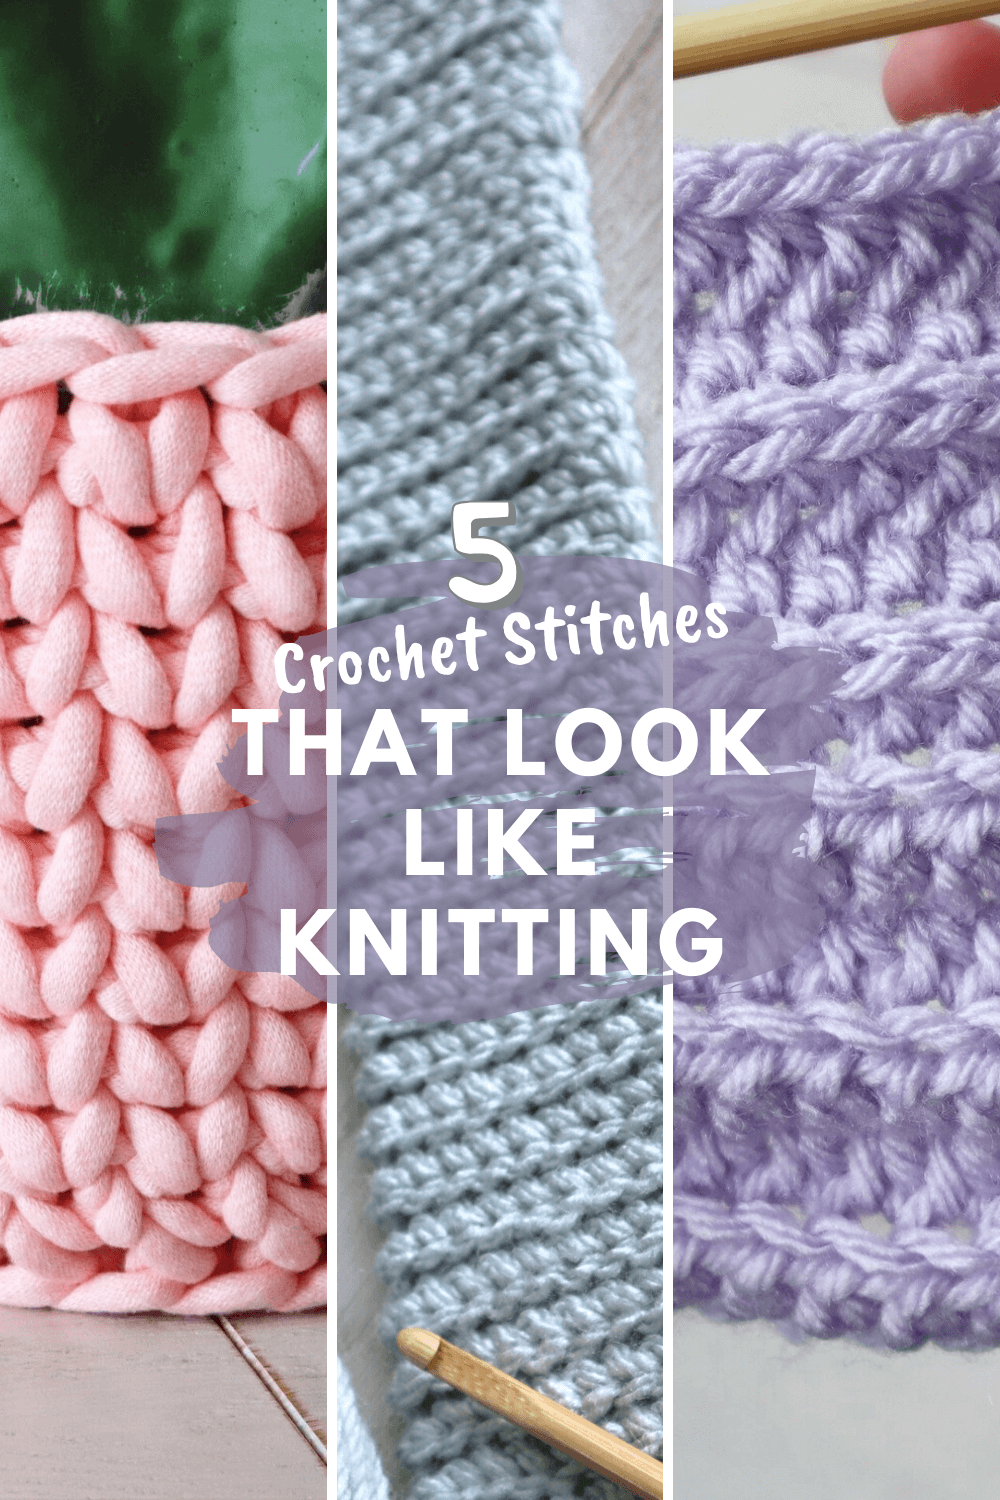 5 Crochet Stitches That Look Like Knitting!